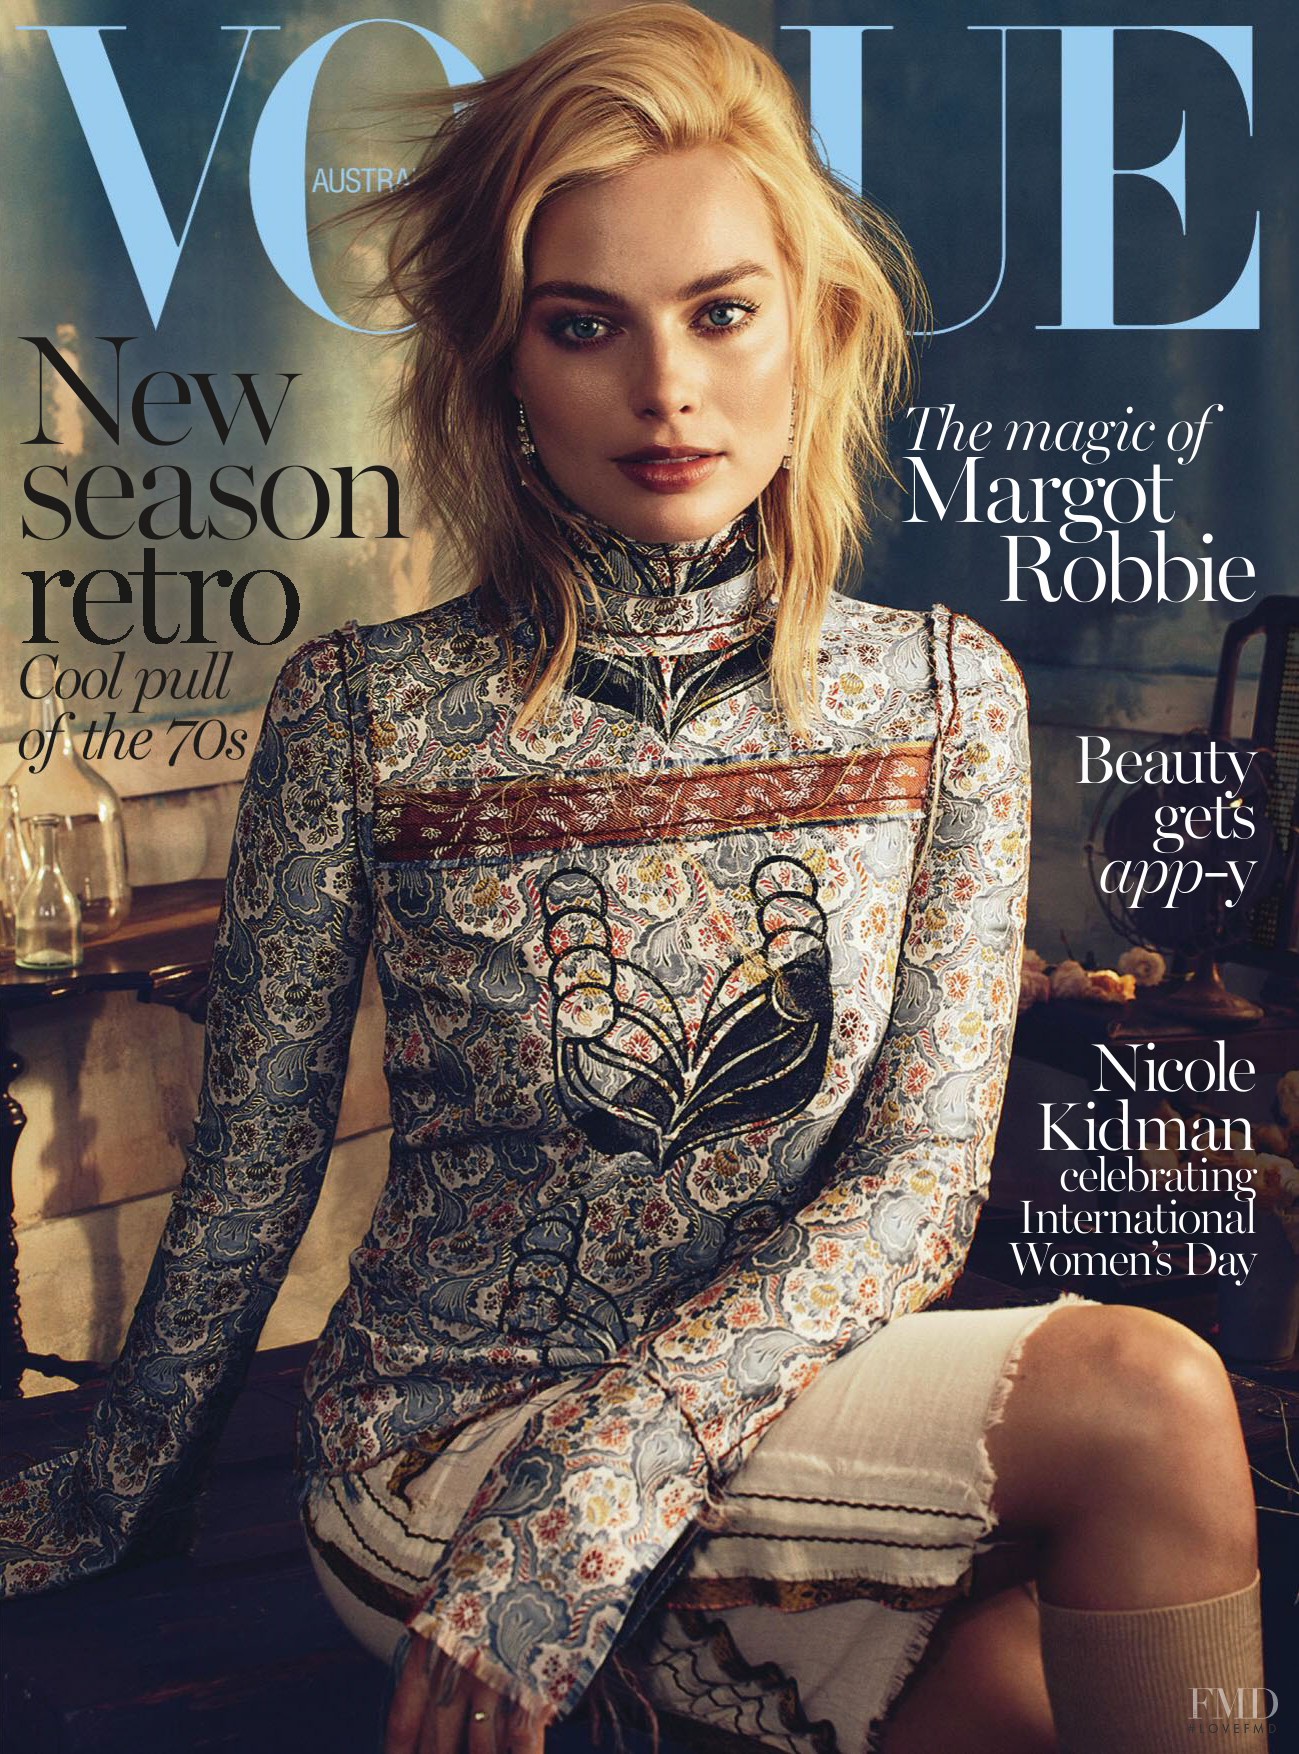 Cover of Vogue Australia with Margot Robbie, March 2015 (ID:33496